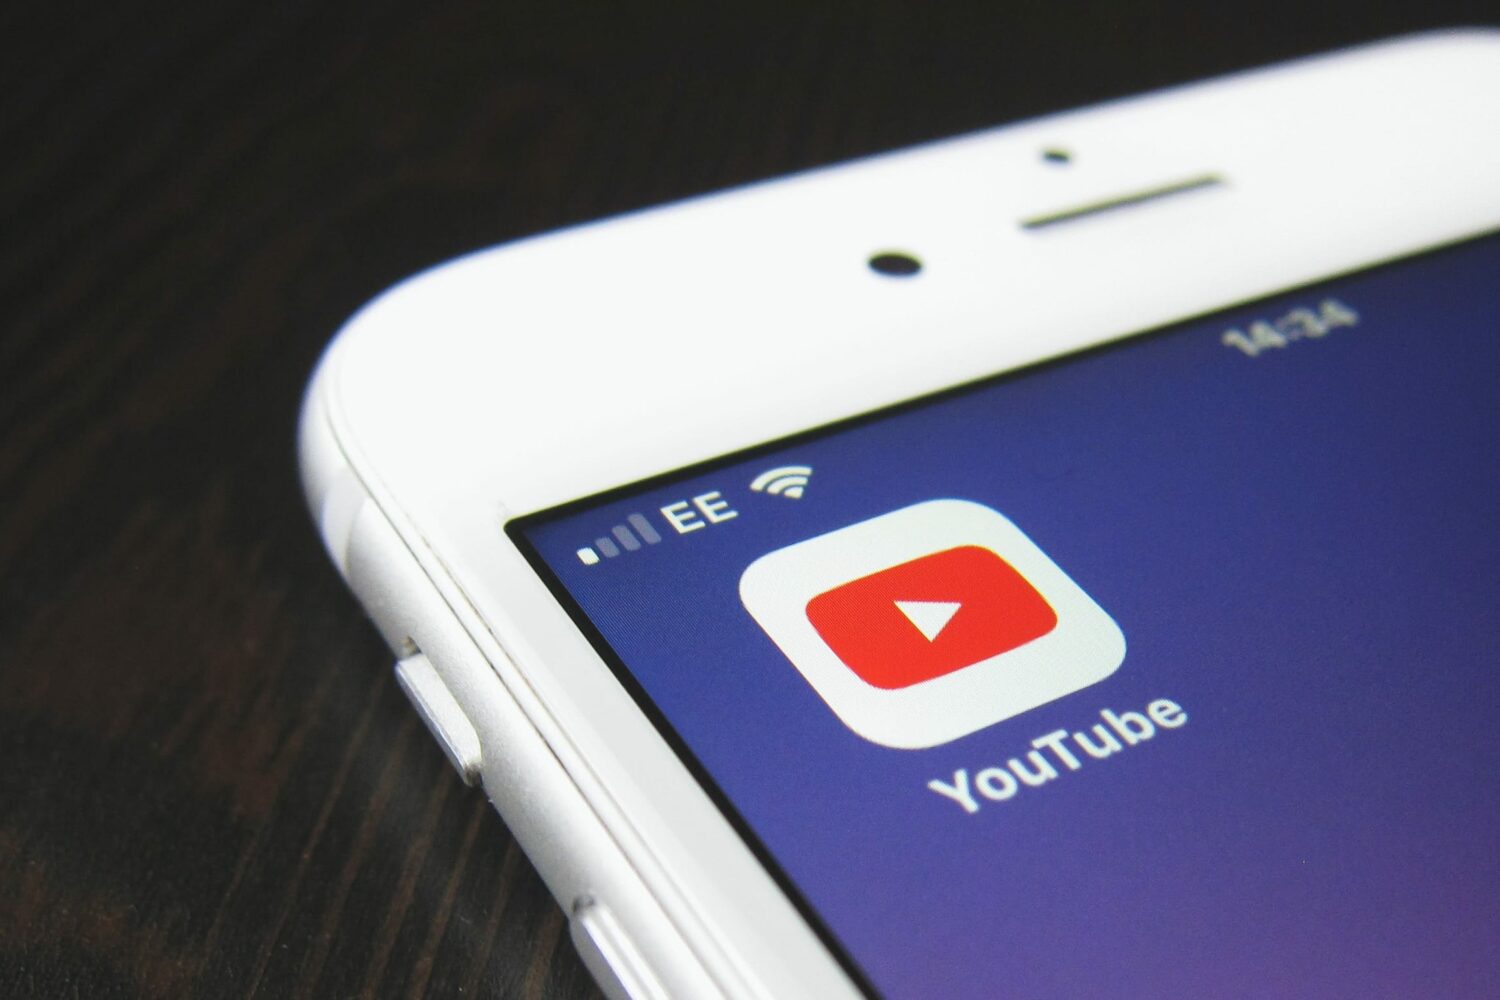 A closeup photograph of a white iPhone with an icon for the Google YouTube app displayed on the home screen